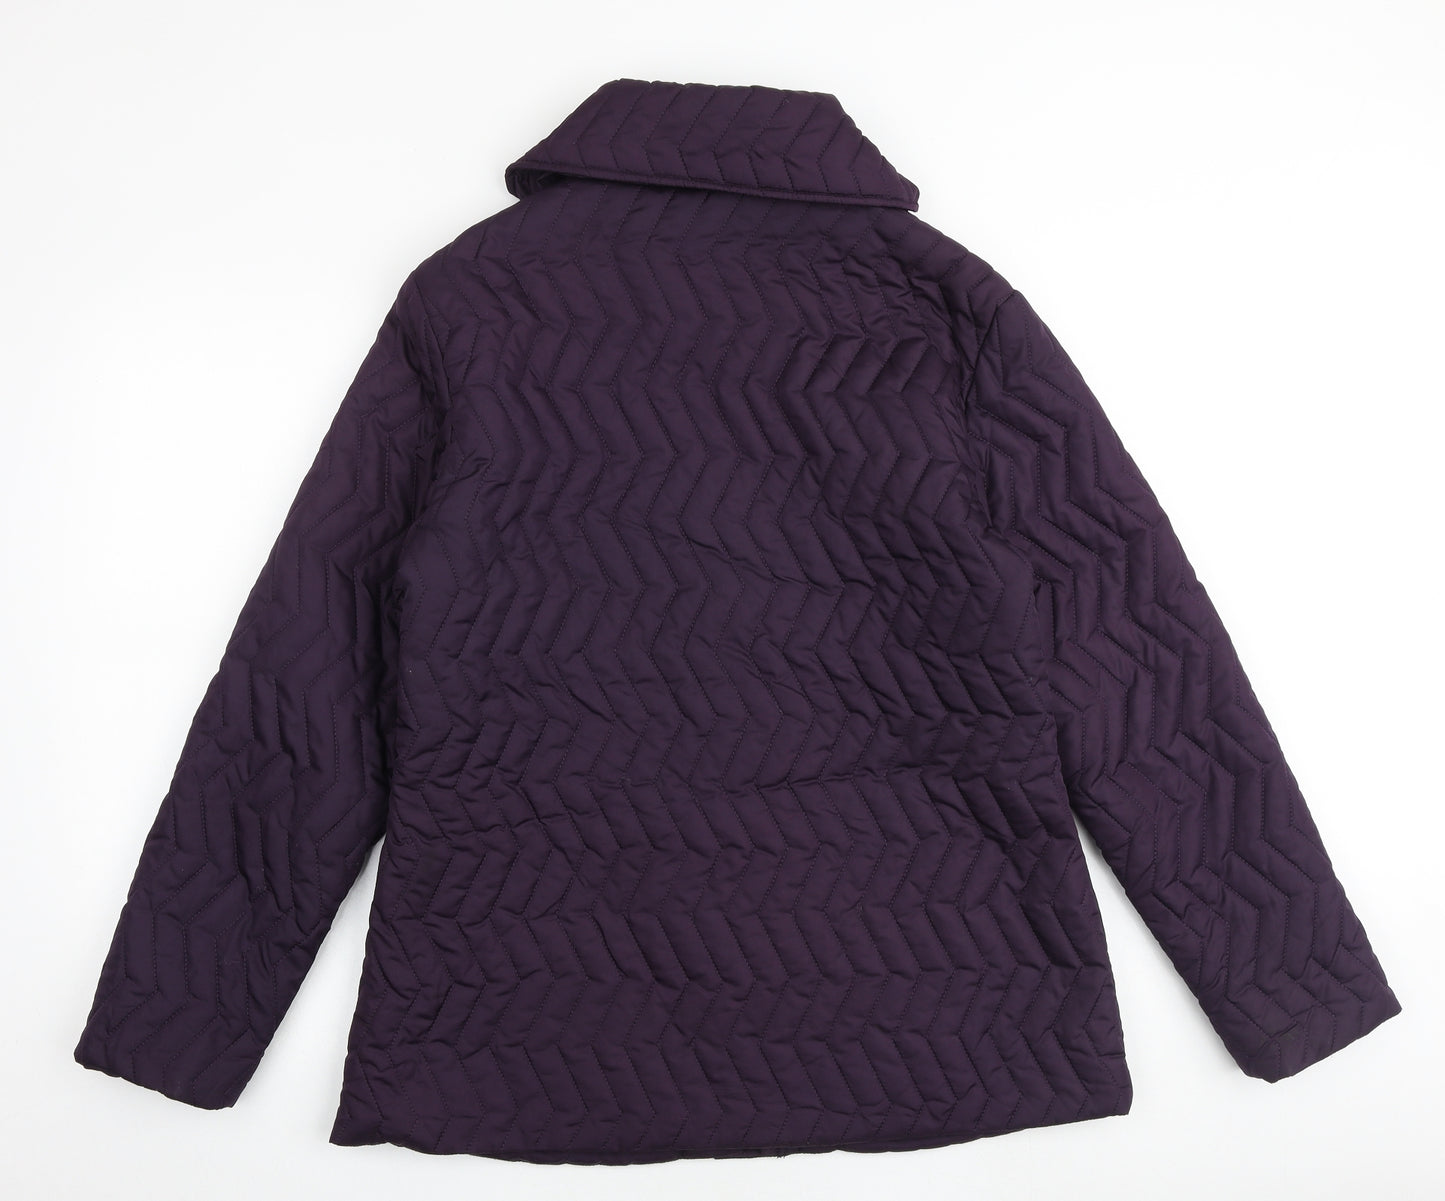 Autonomy Womens Purple Quilted Jacket Size 16 Zip